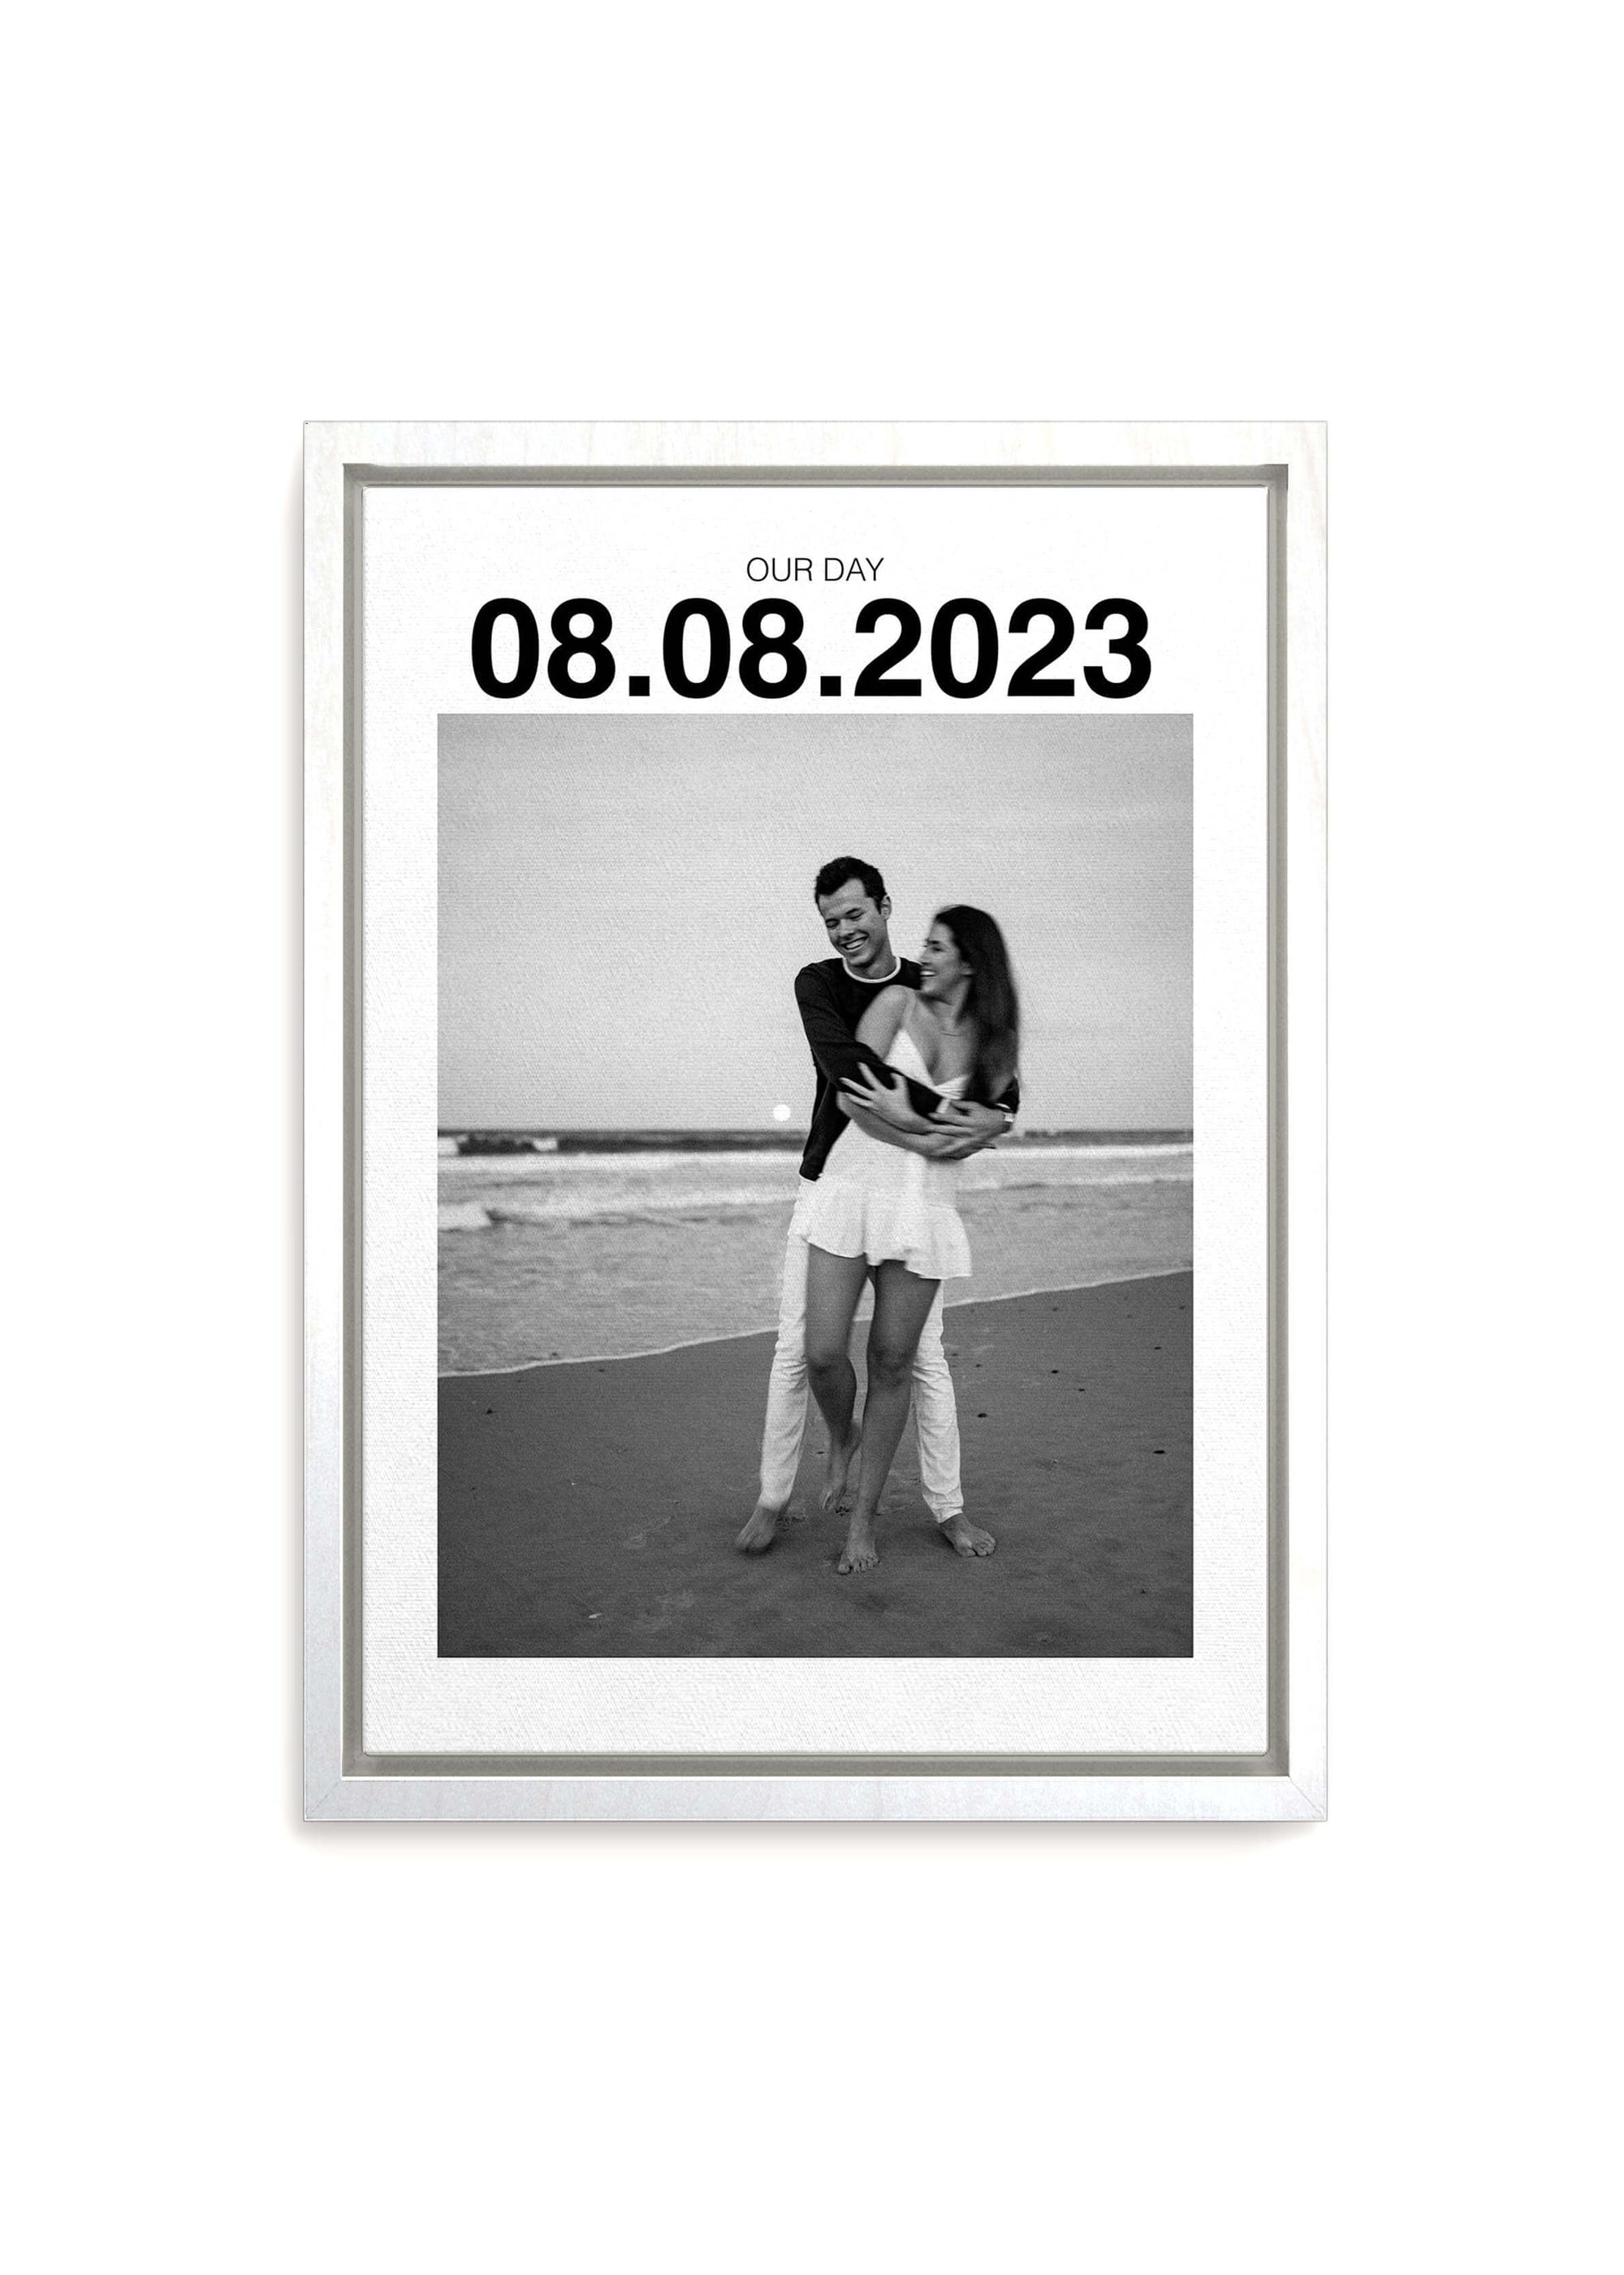 Personalized anniversary gift canvas with large custom date on white framed canvas and a couple on the beach smiling in black and white. Canvas is on a white background.